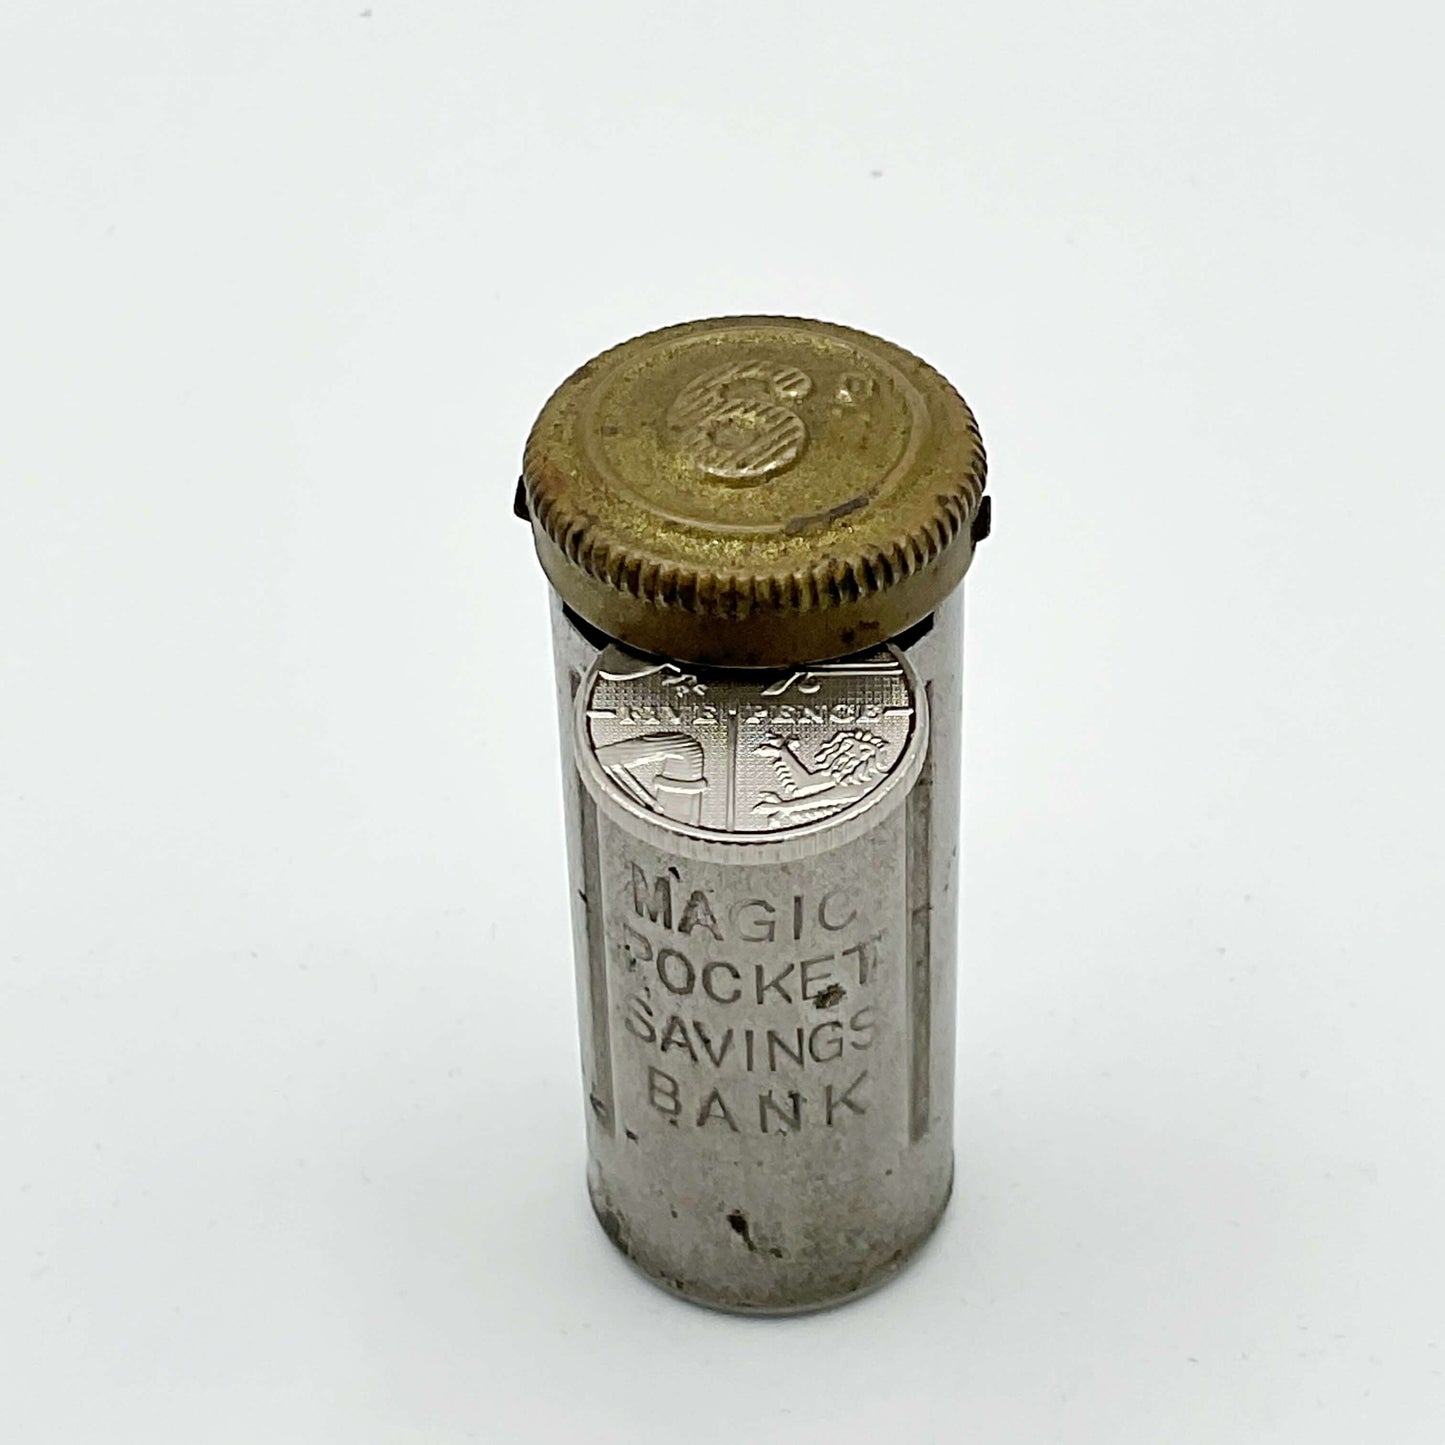 Vintage coin holder called the Magic Pocket Savings Bank with a 5p coin in the slot waiting to be pushed into the holder